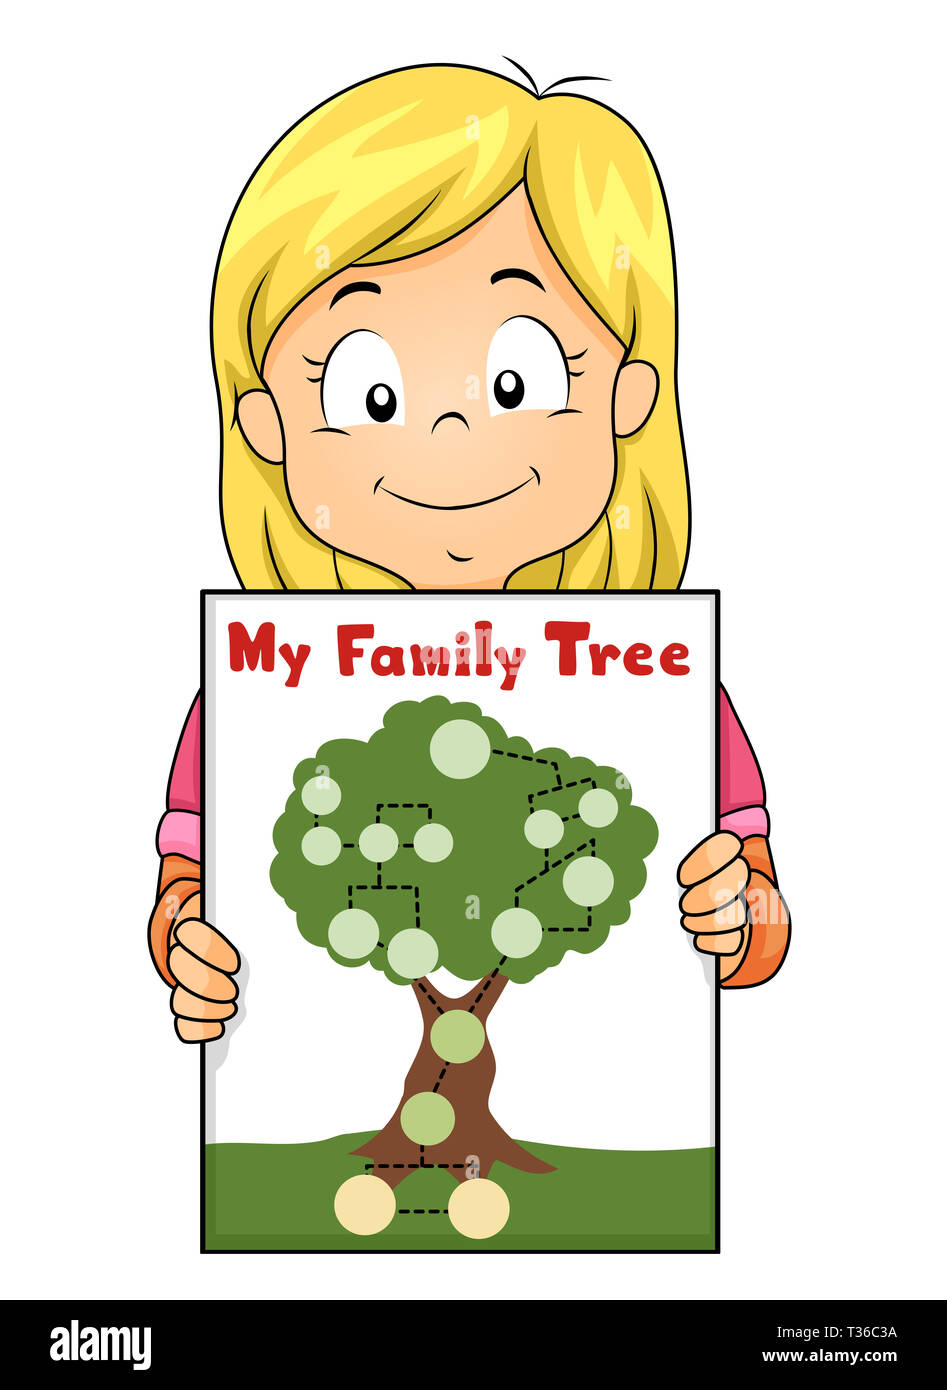 Illustration of a Kid Girl Showing Her Family Tree Stock Photo - Alamy